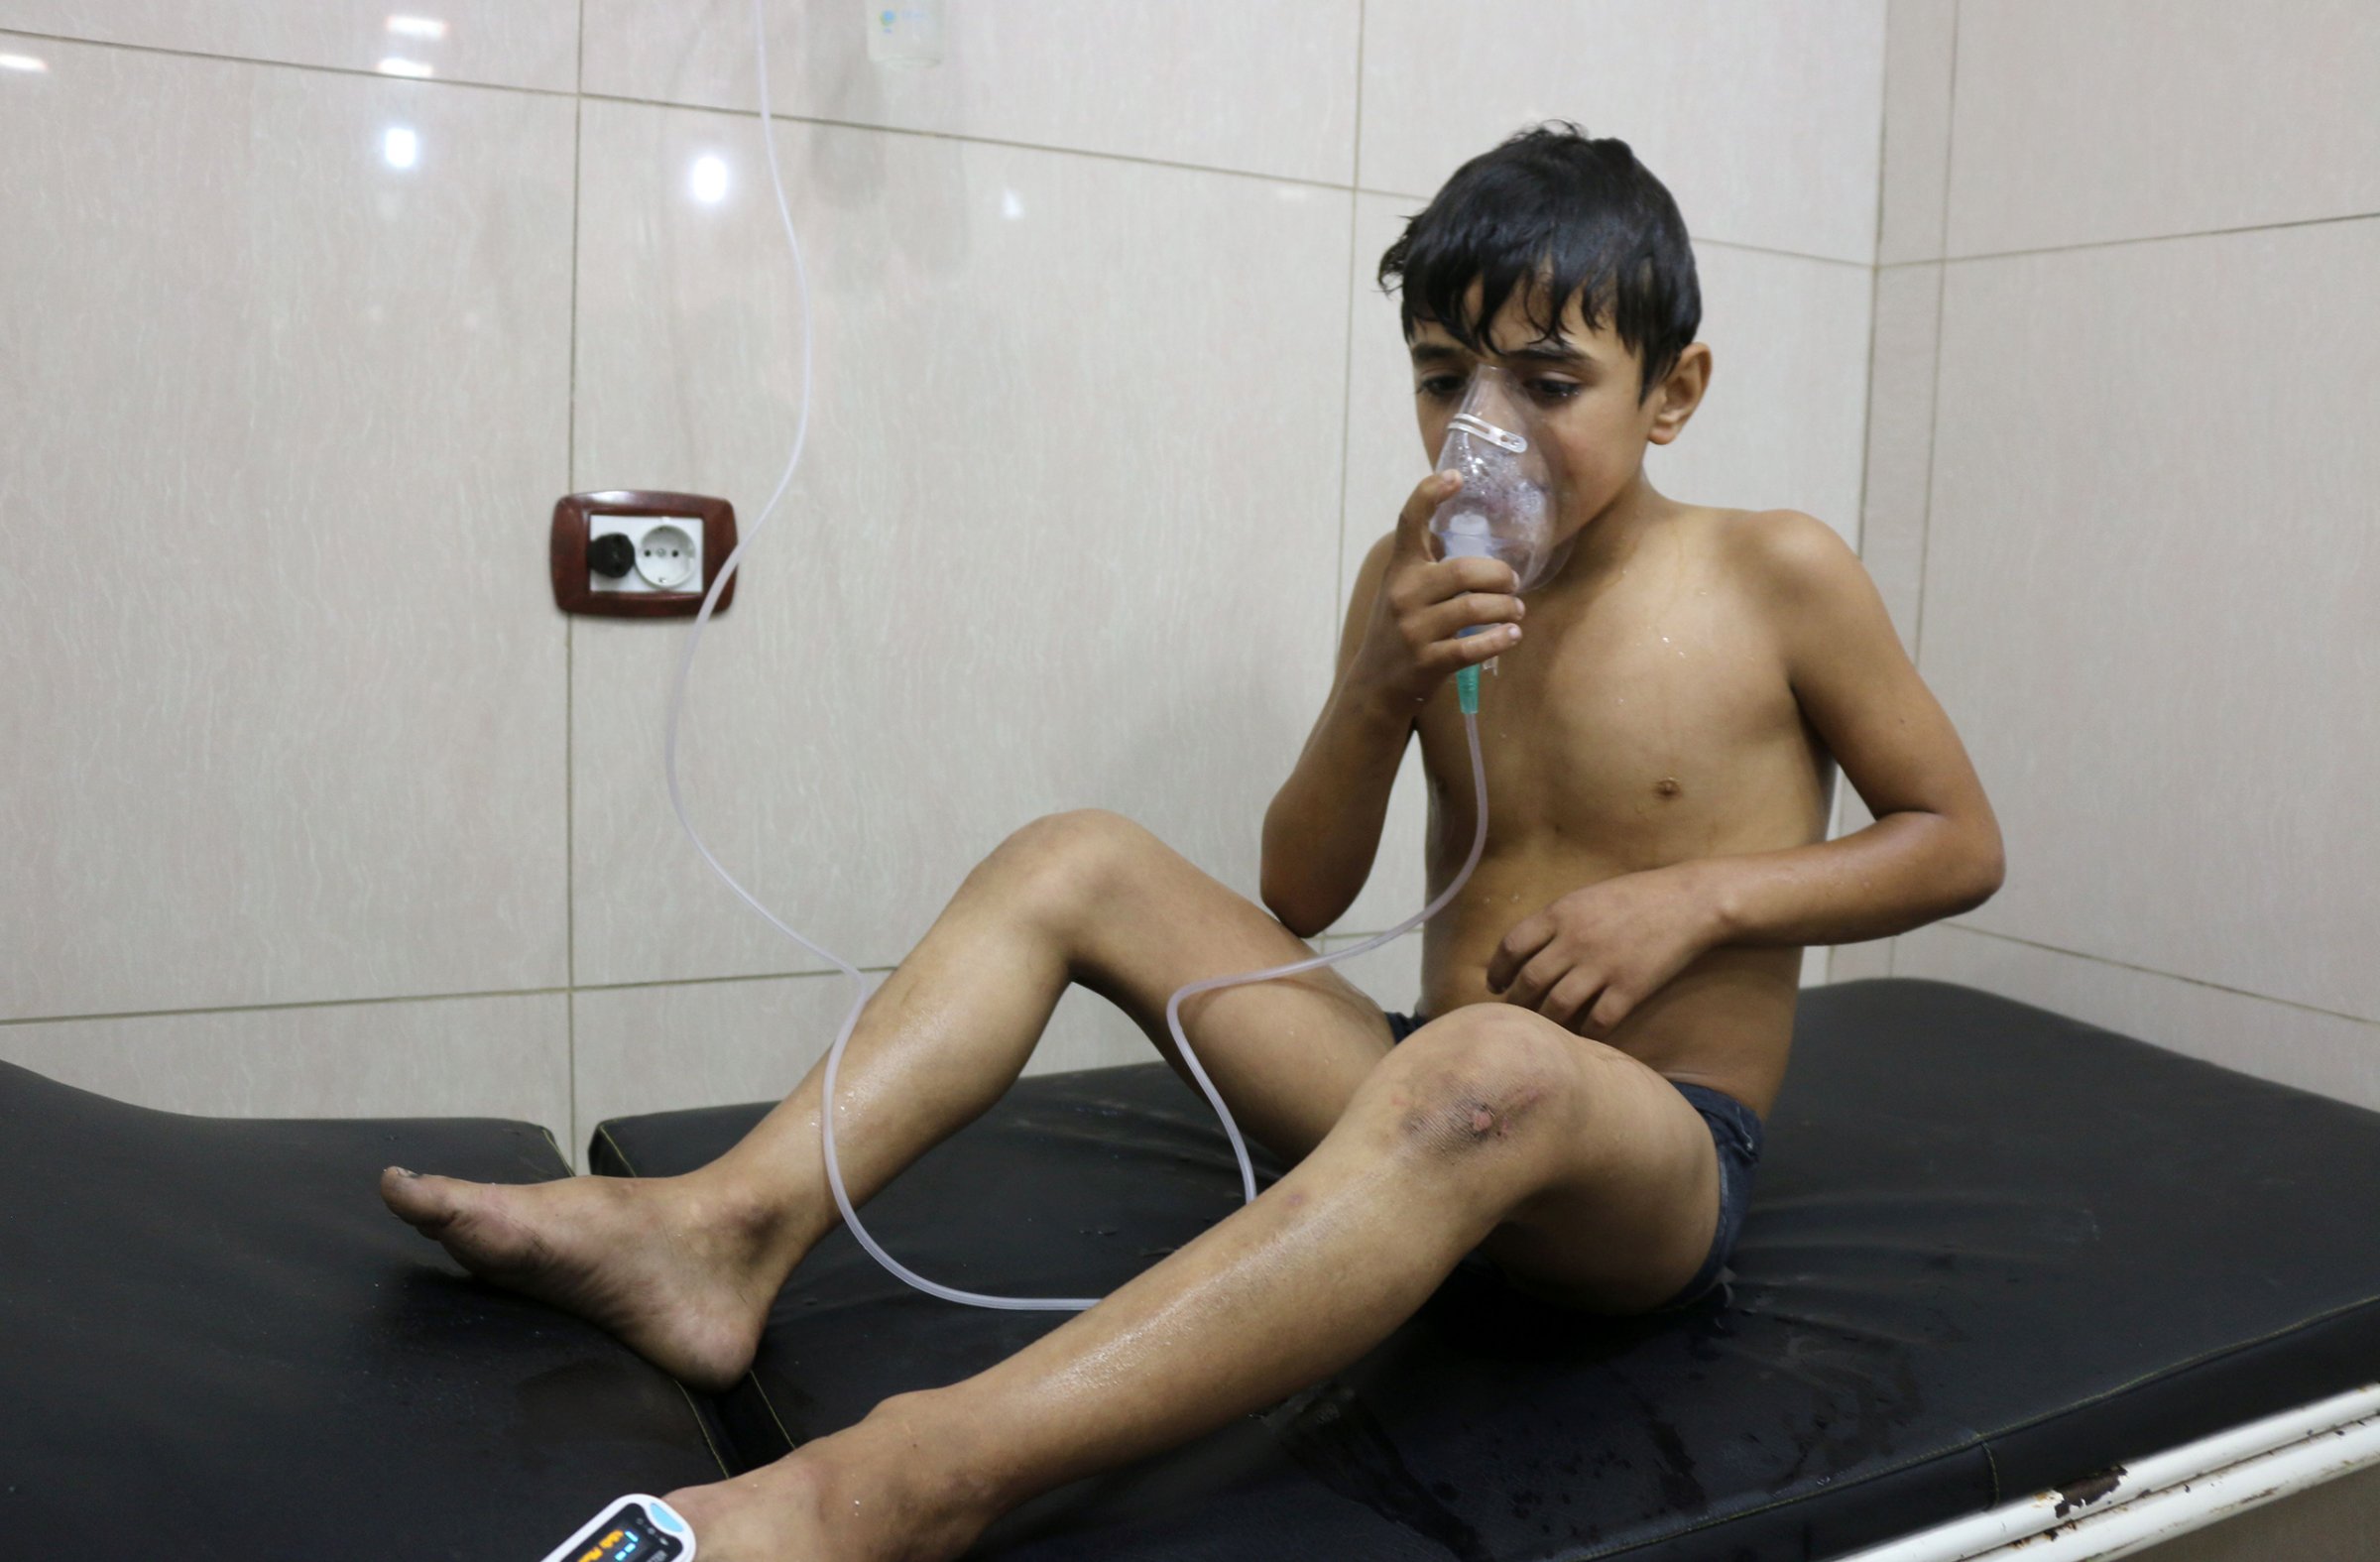 A Syrian boy suffering from breathing difficulties is treated at a makeshift hospital after regime helicopters dropped barrel bombs on the rebel-held Sukari neighborhood of Aleppo on Sept. 6, 2016. The Britain-based Syrian Observatory for Human Rights said more than 70 people—"most of them civilians"—were treated for choking symptoms.